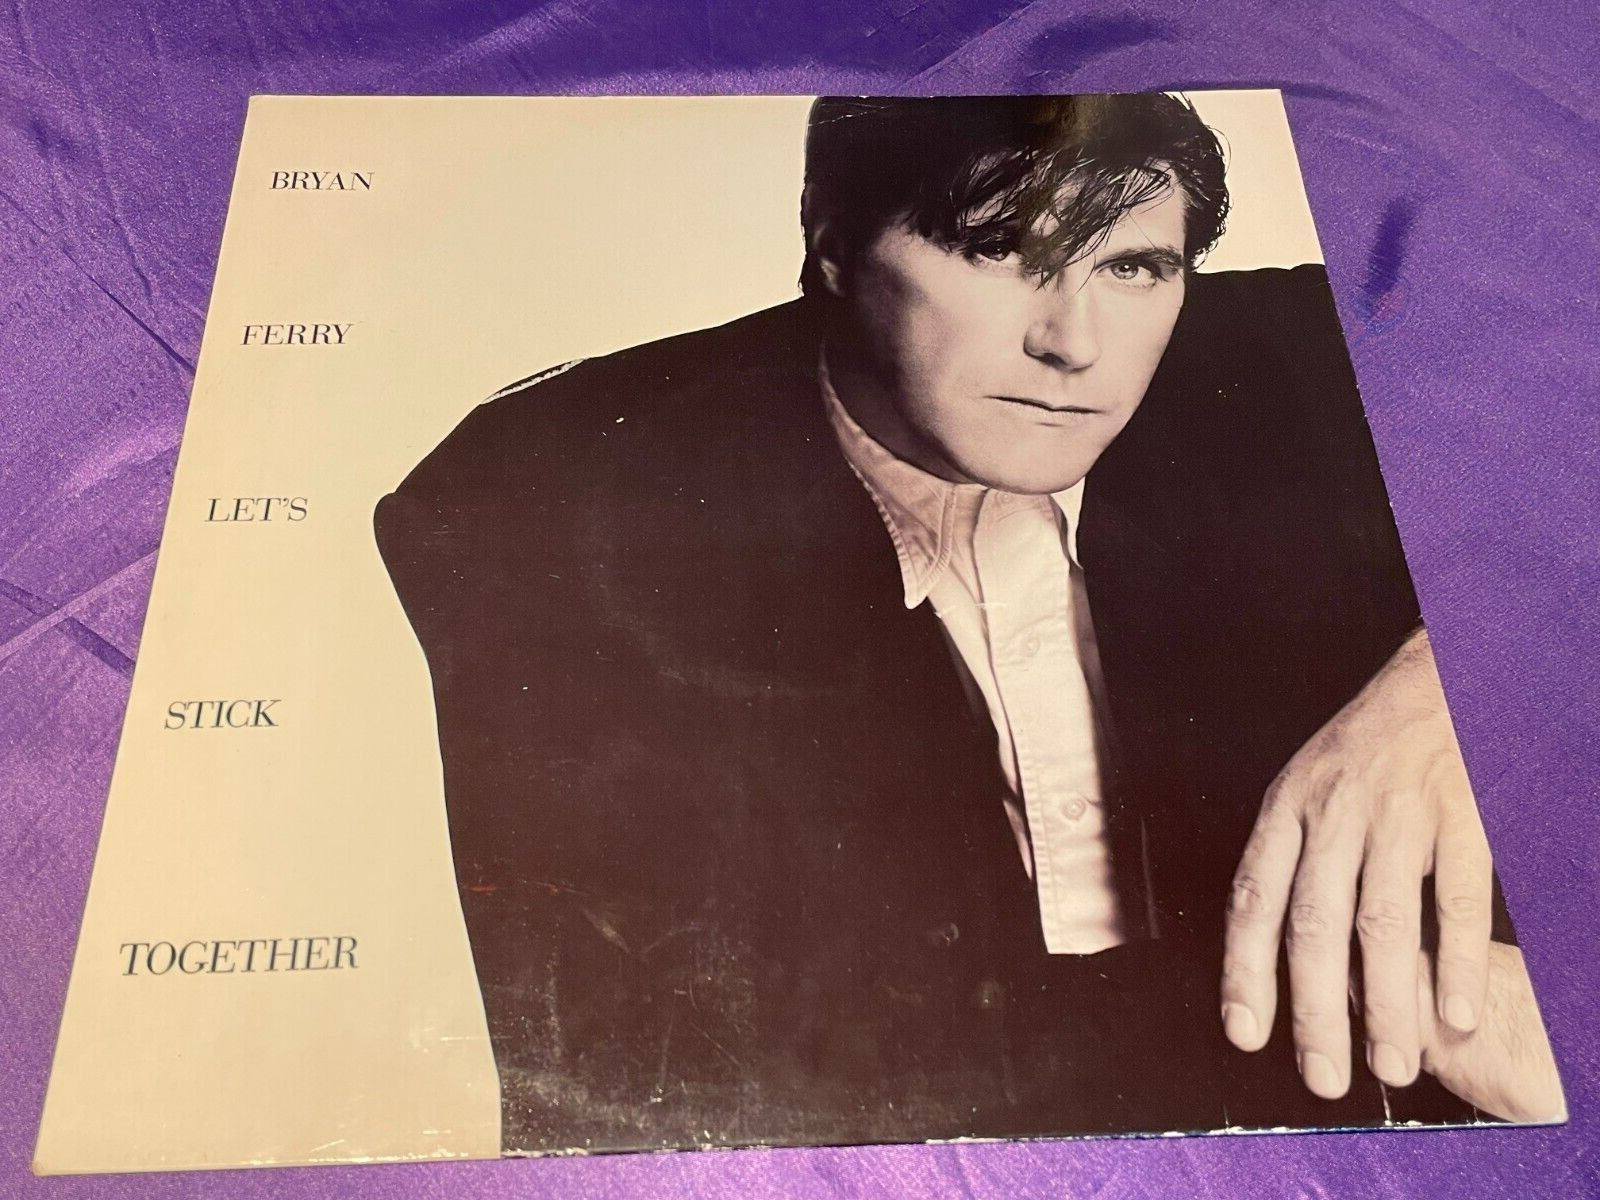 Bryan Ferry & Roxy Music - Let's Stick Together - Vinyl Record 12" Single - 1988